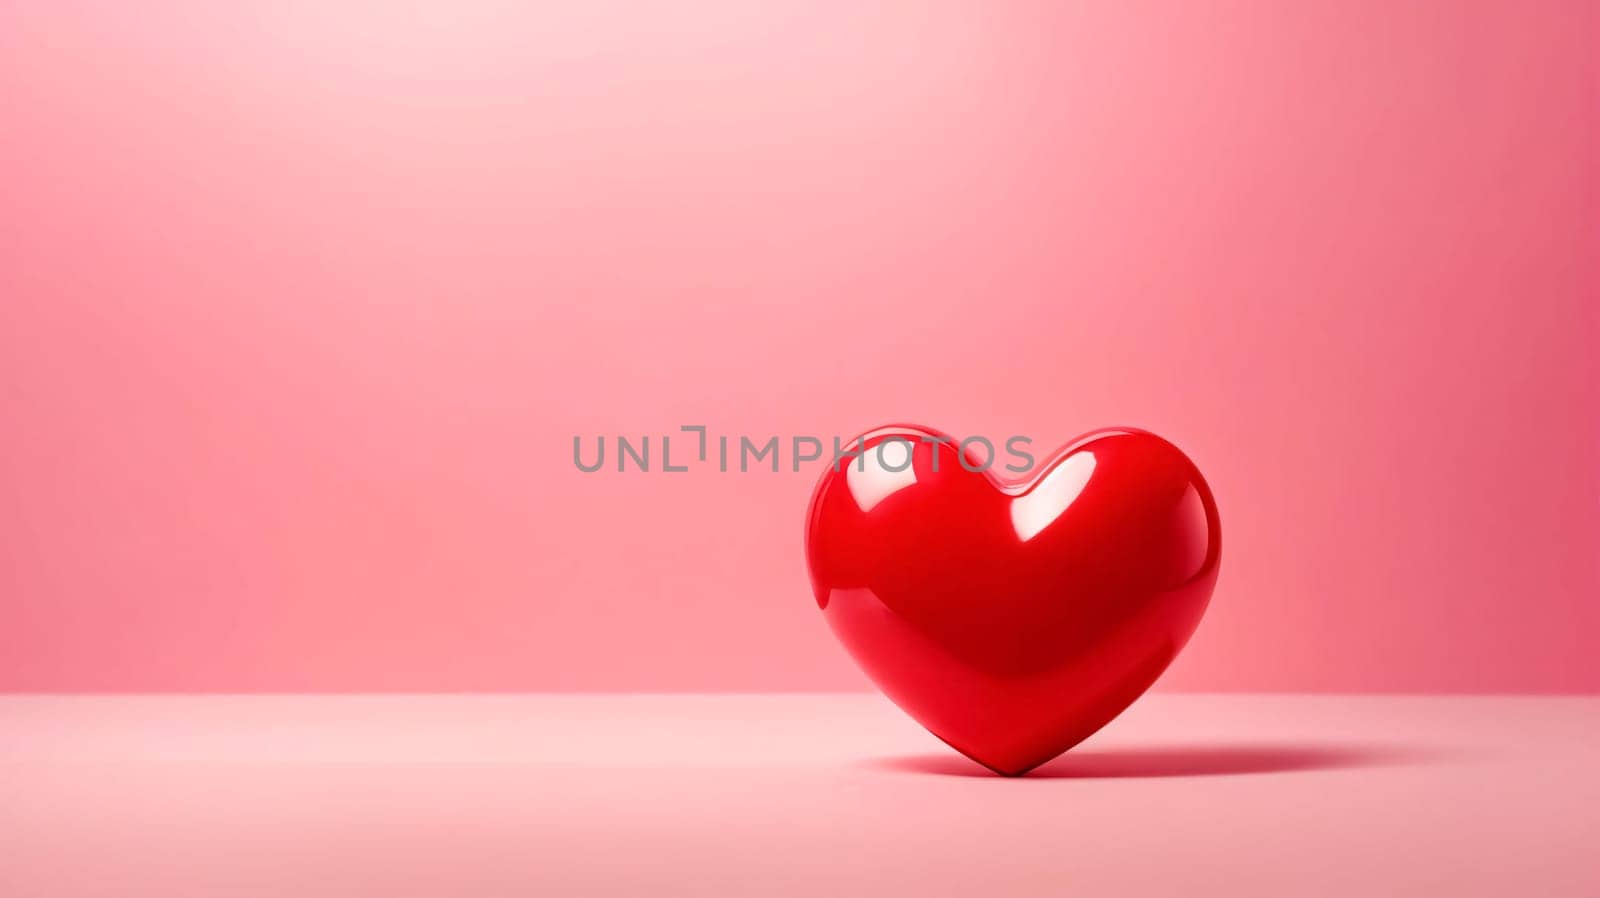 Shape of red hearts with pink background for card creation and multimedia content